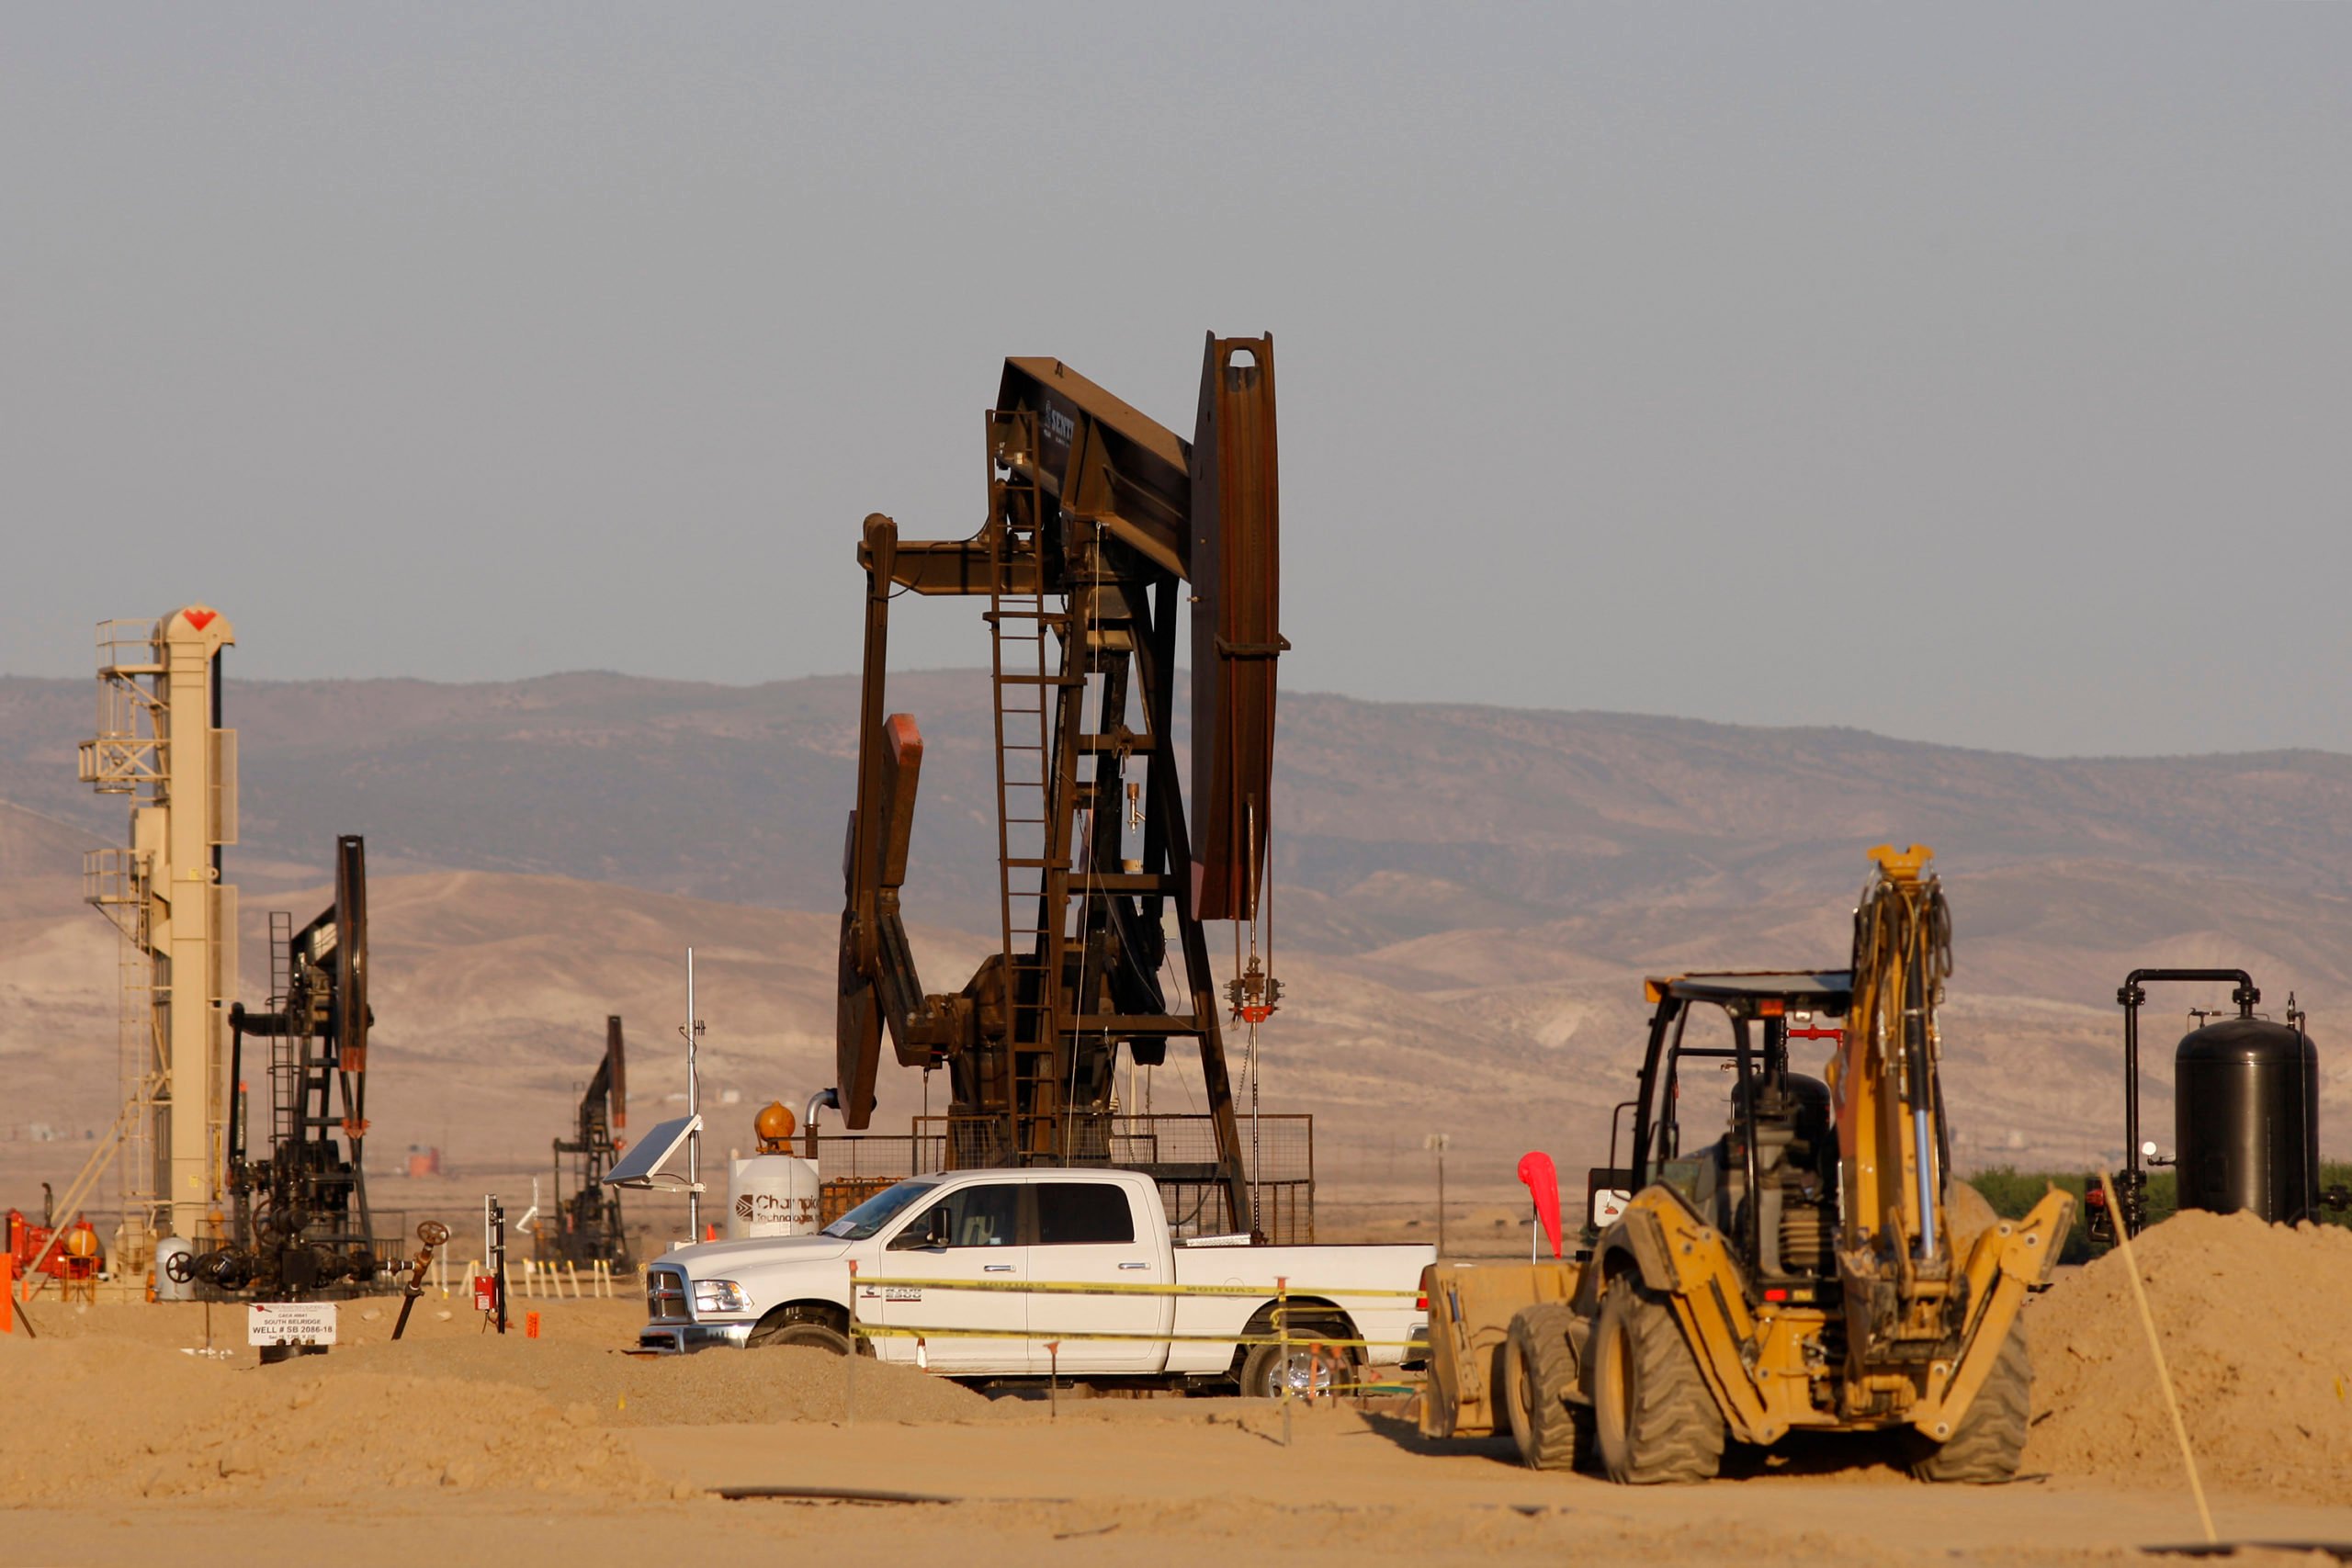 Fracking jacks stand in a field being developed for drilling on March 24, 2014 near Lost Hills, California. (David McNew/Getty Images)